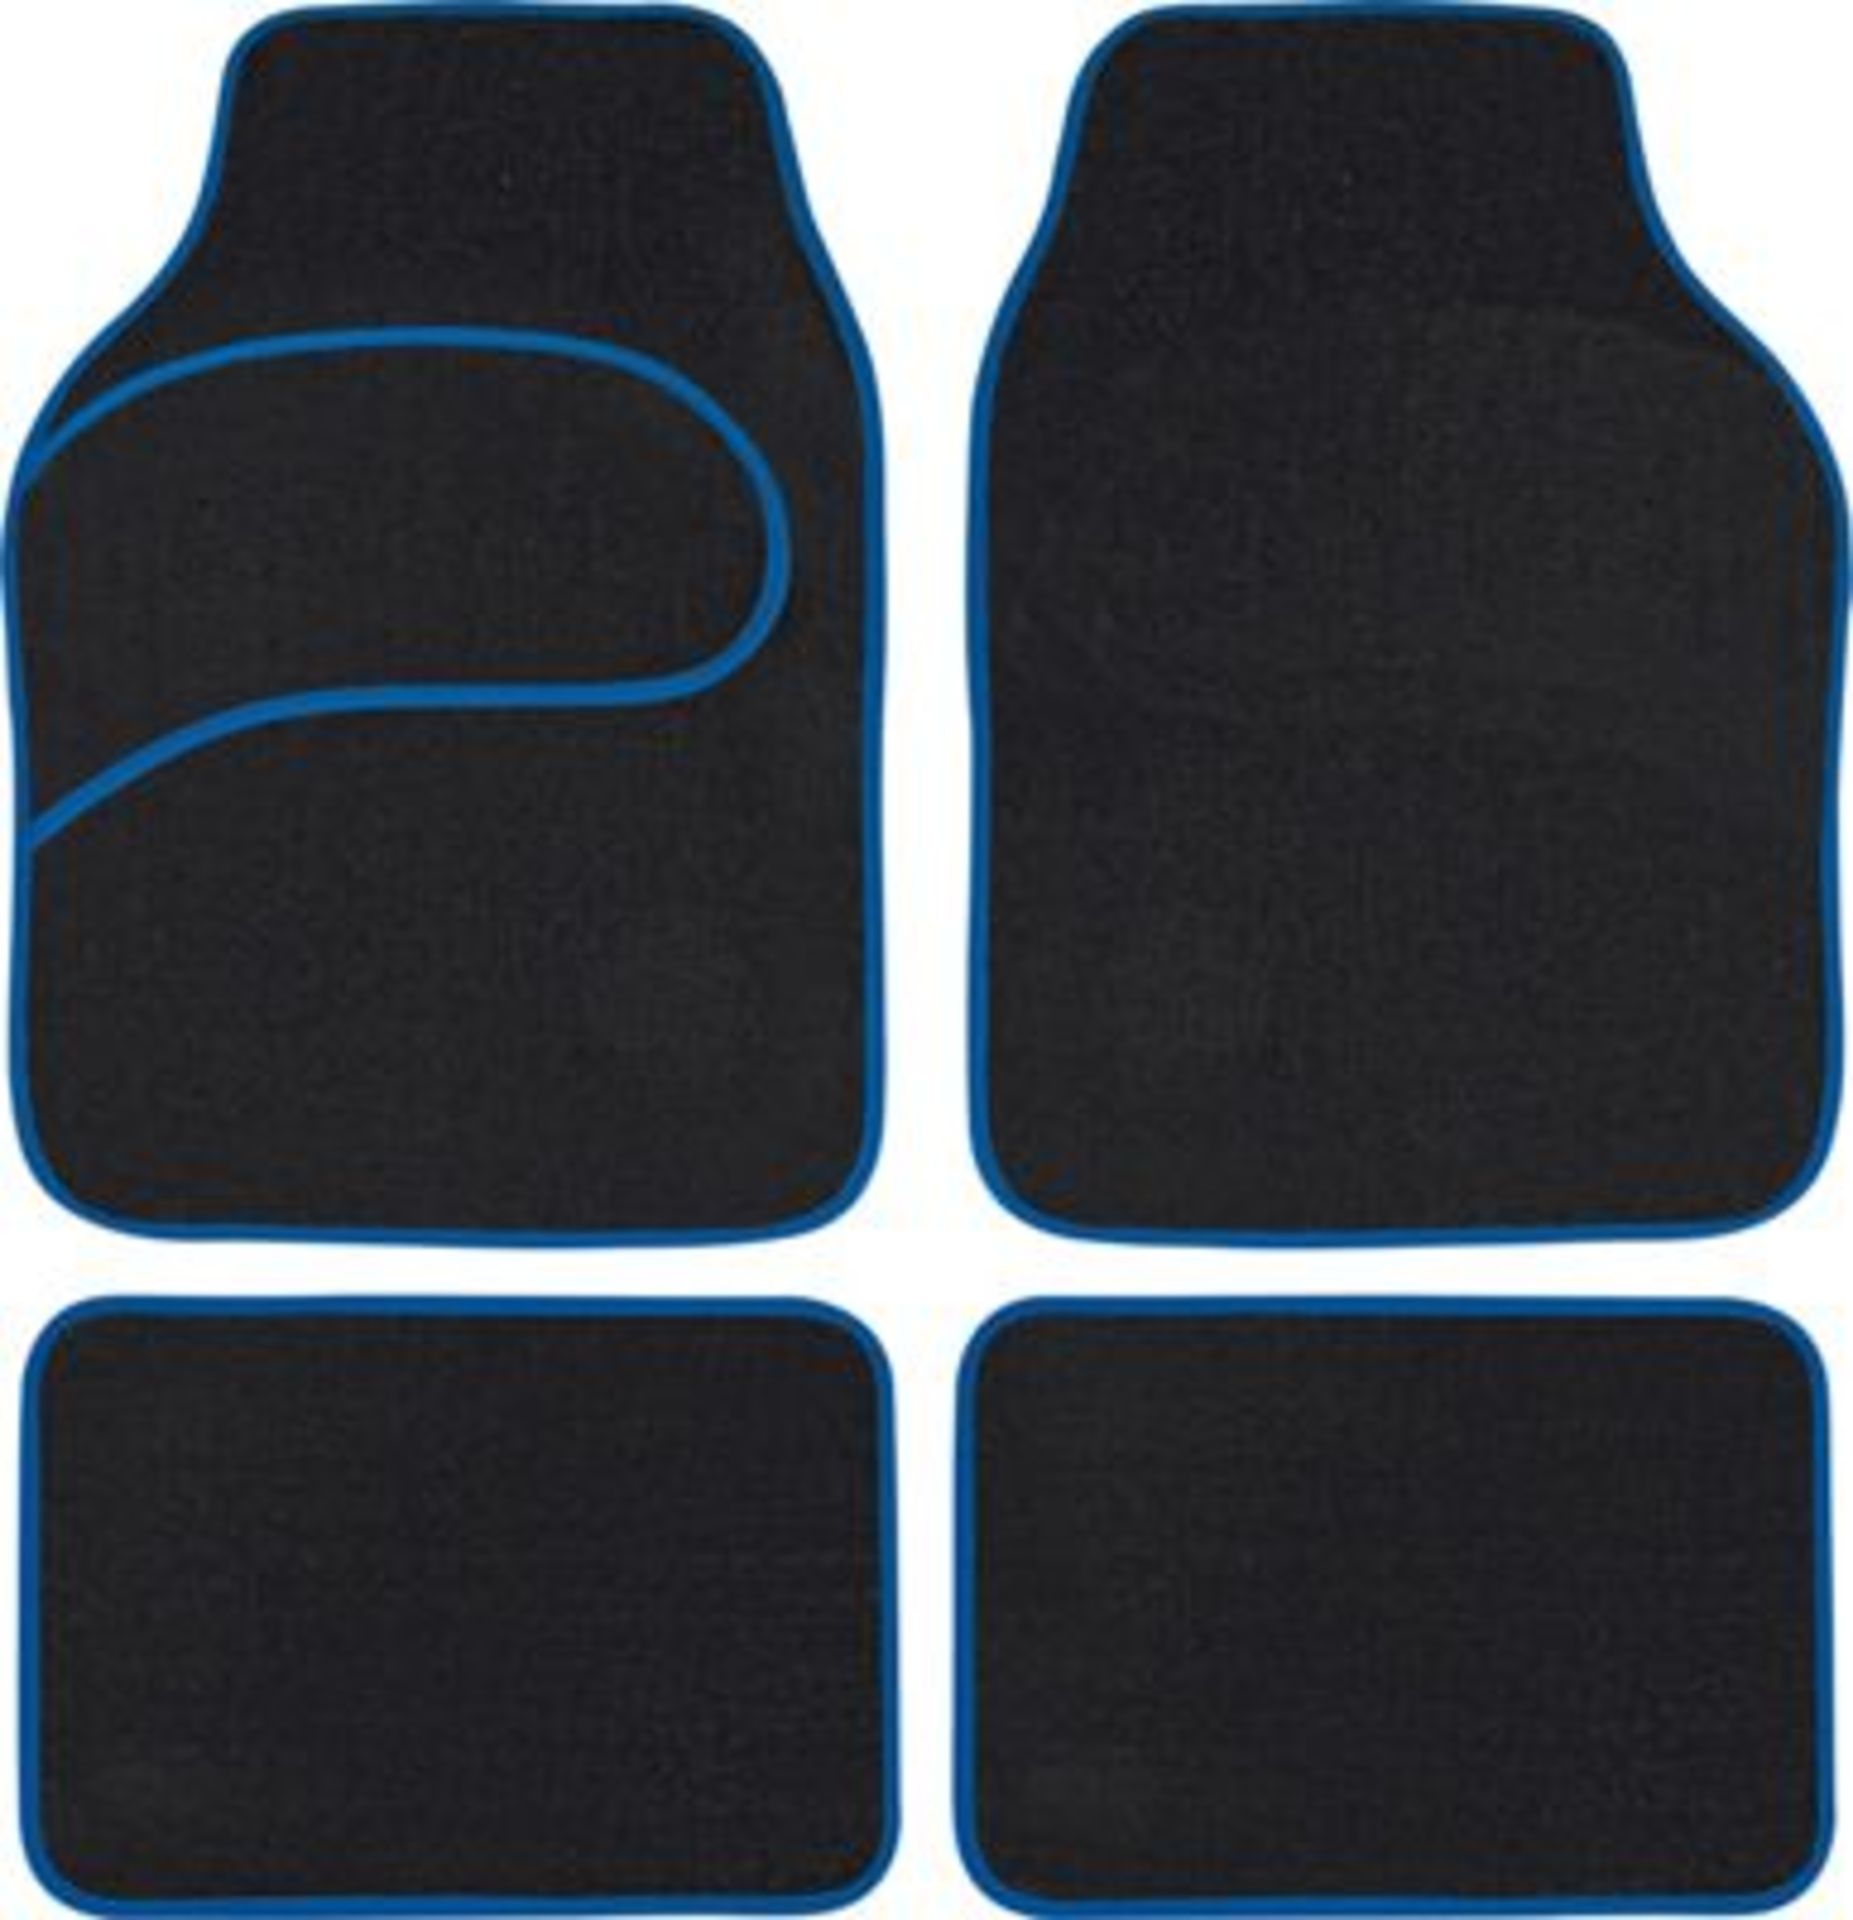 V Brand New Set of 4 Universal Fit Car Mats (Item does not have blue trim) X 2 YOUR BID PRICE TO